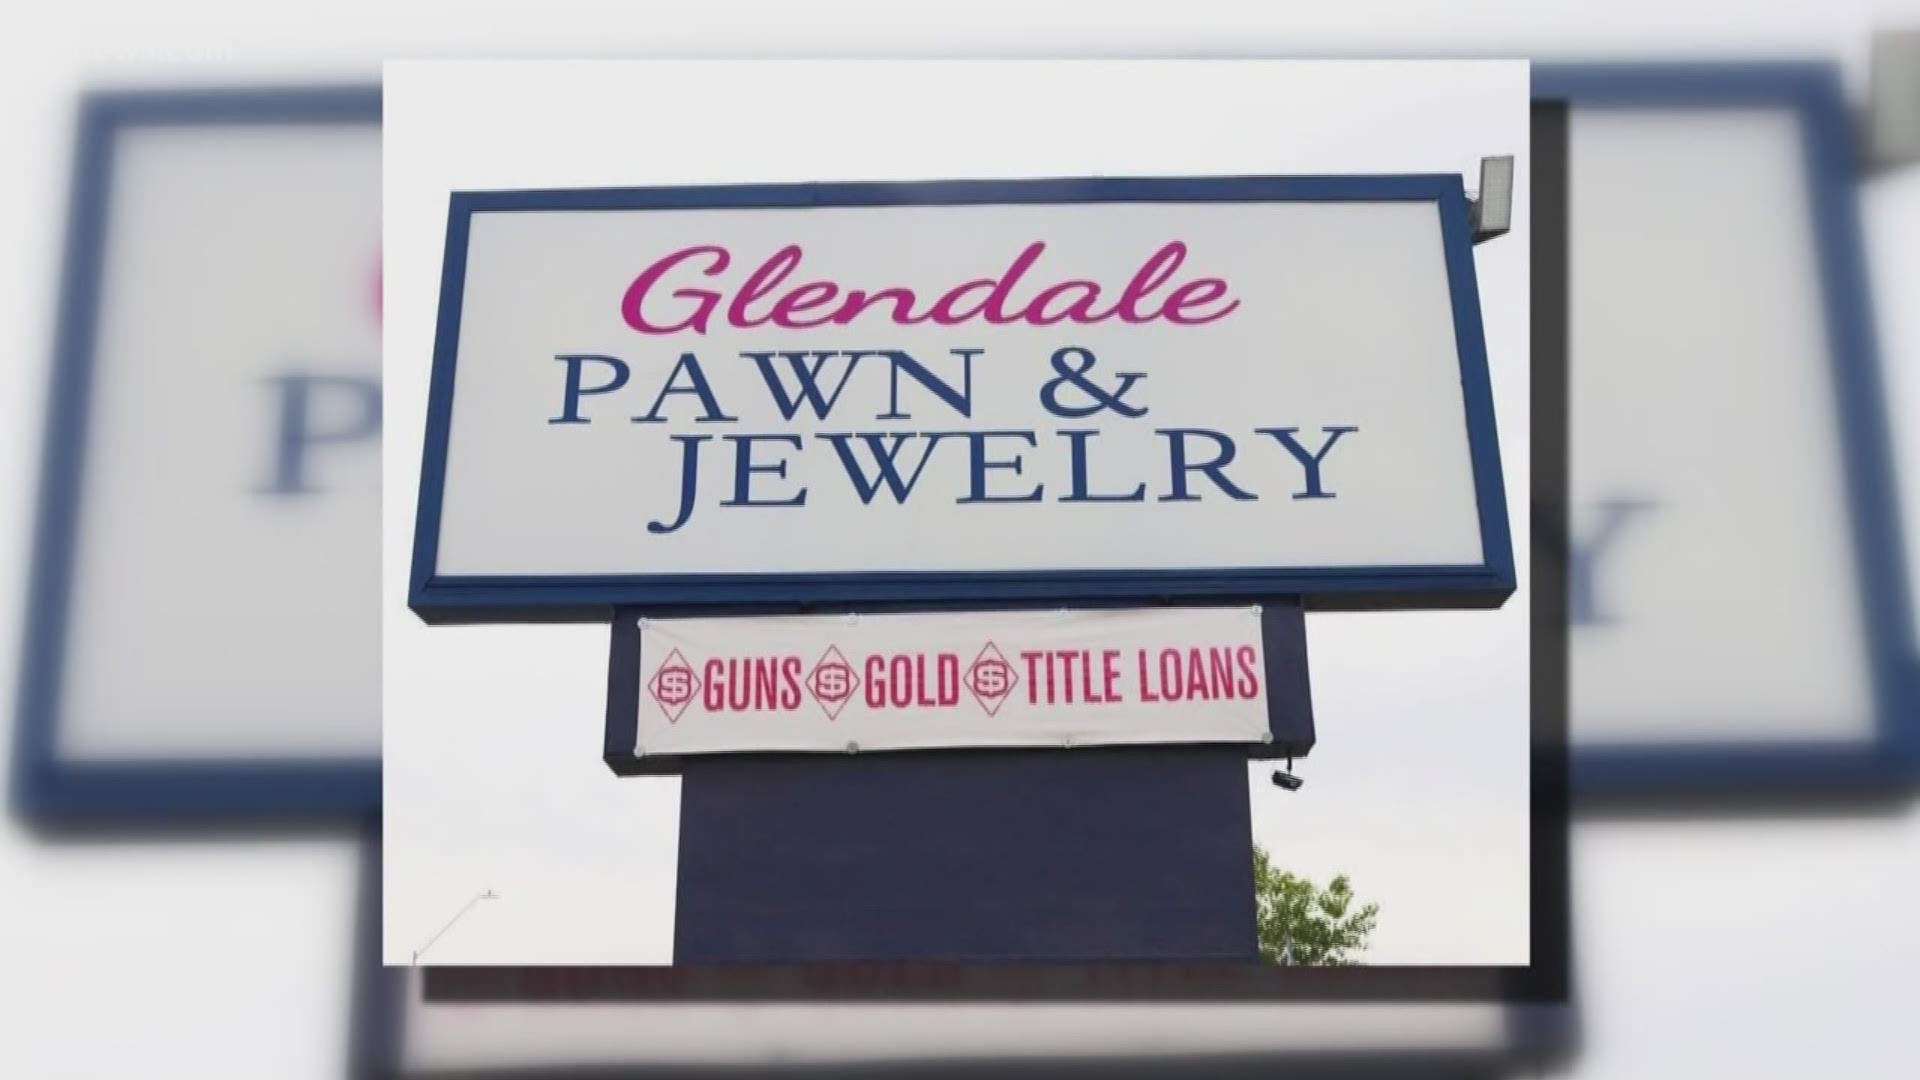 "The economy is going to be substantially worse," Lara Goldfarb, owner of Glendale Pawn and Jewelry, said.